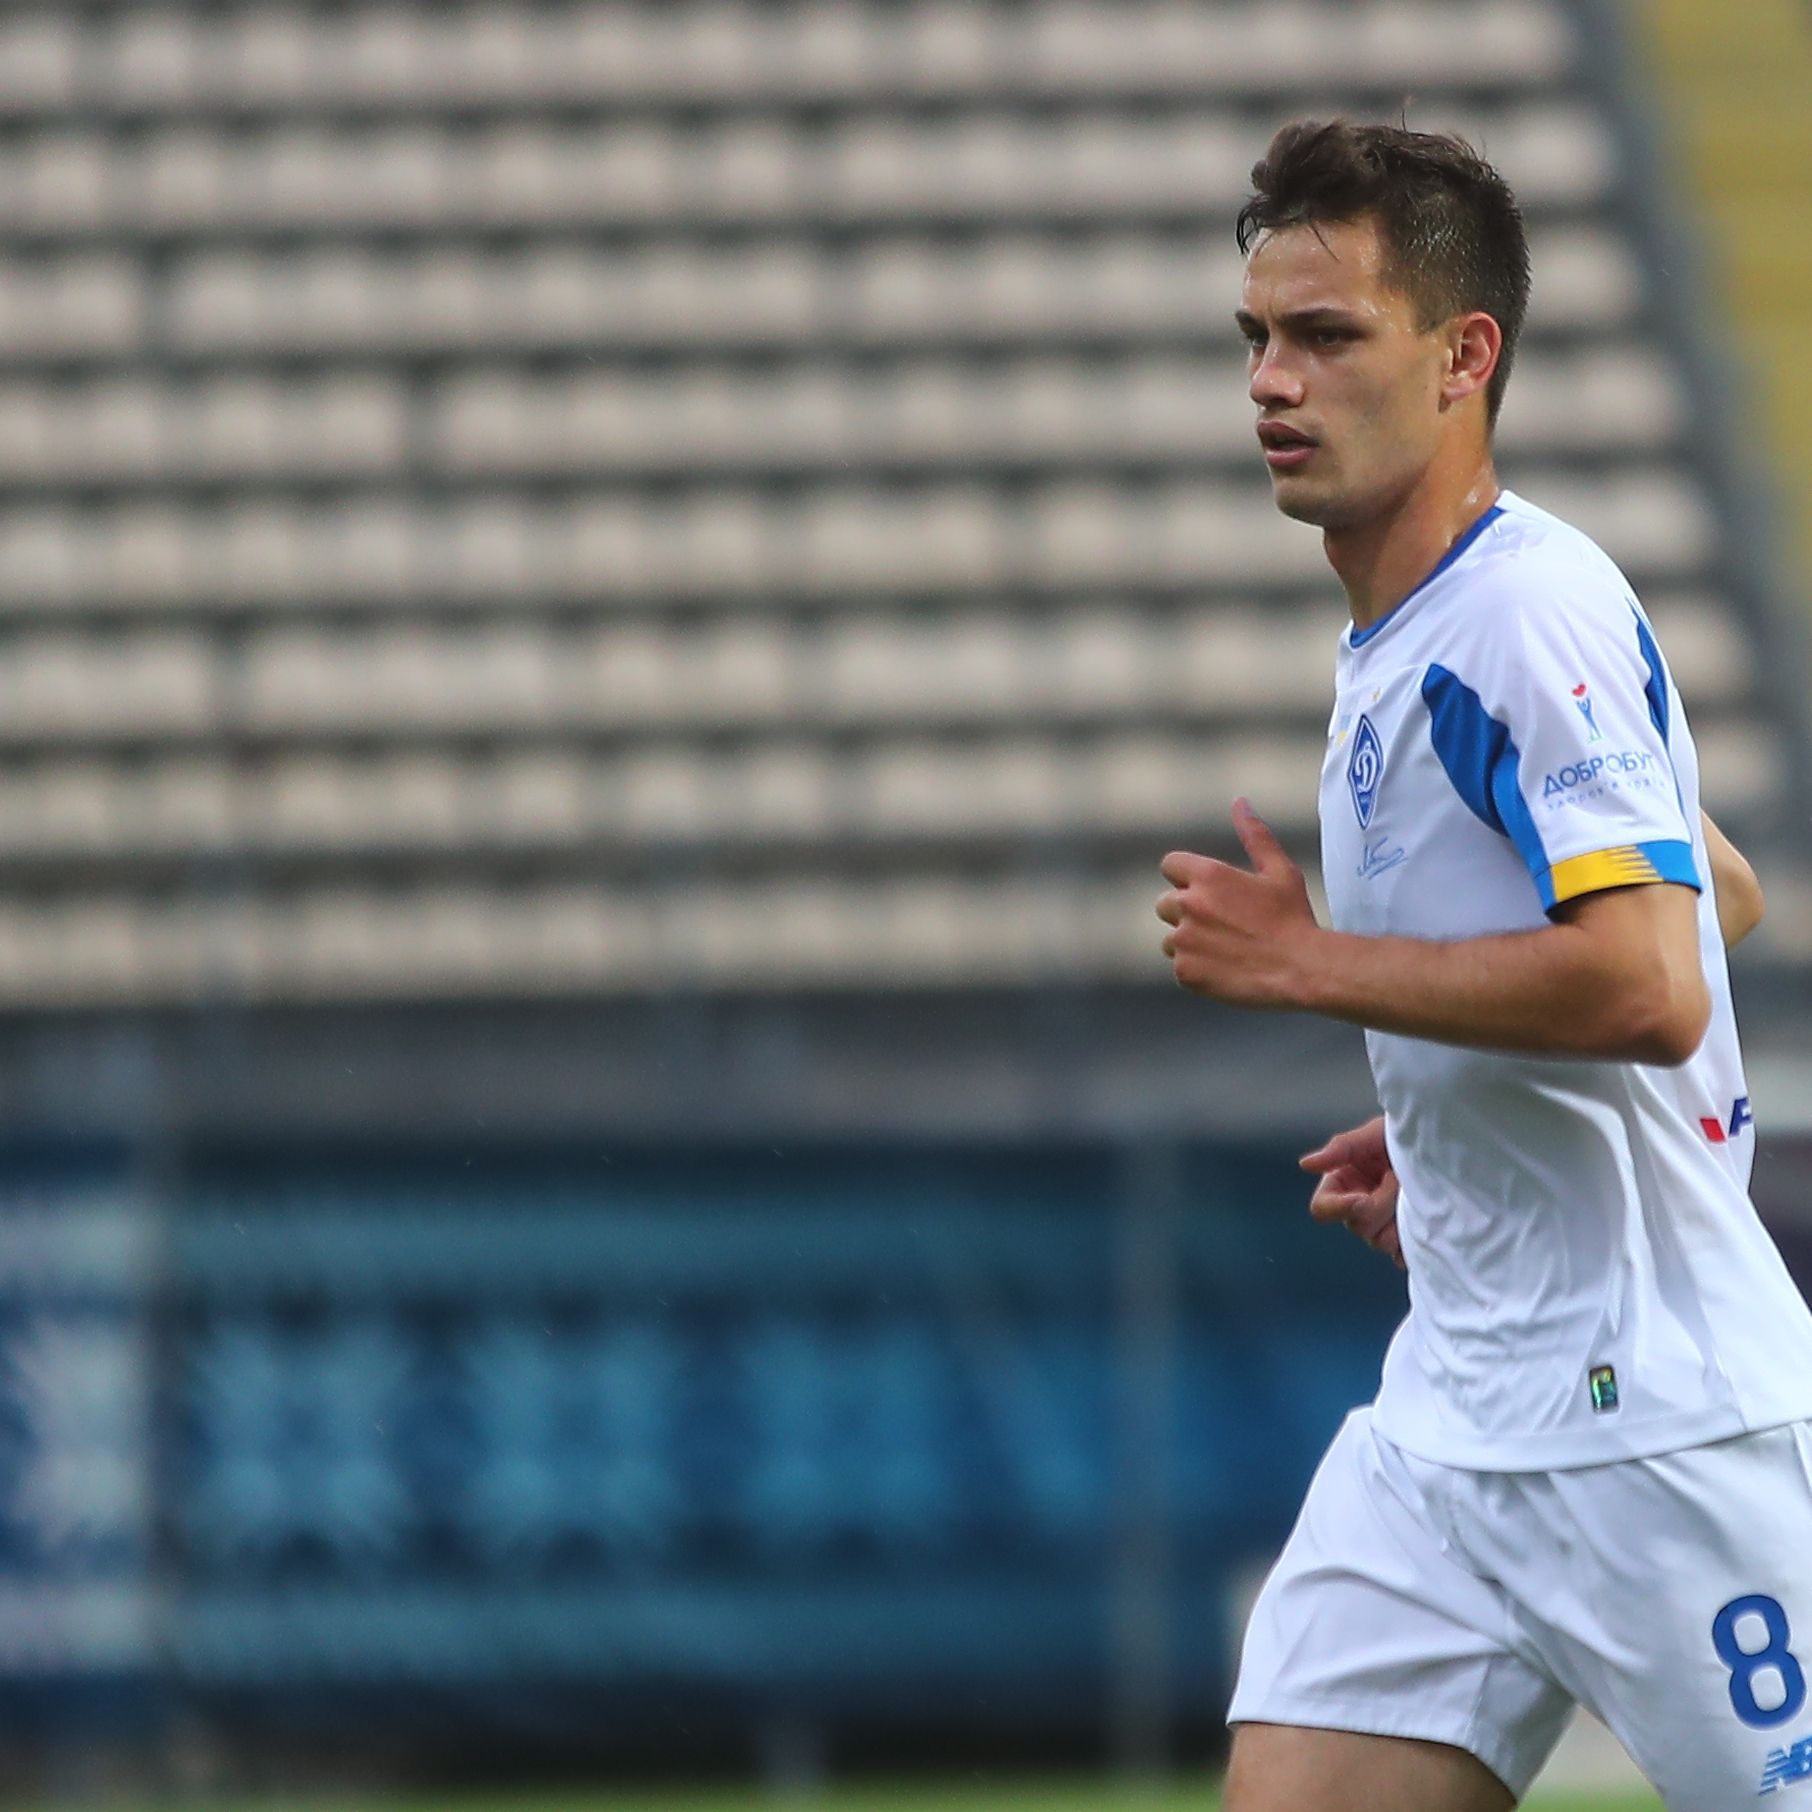 Volodymyr Shepelev: “The task for the second half was to apply pressure and attack more”